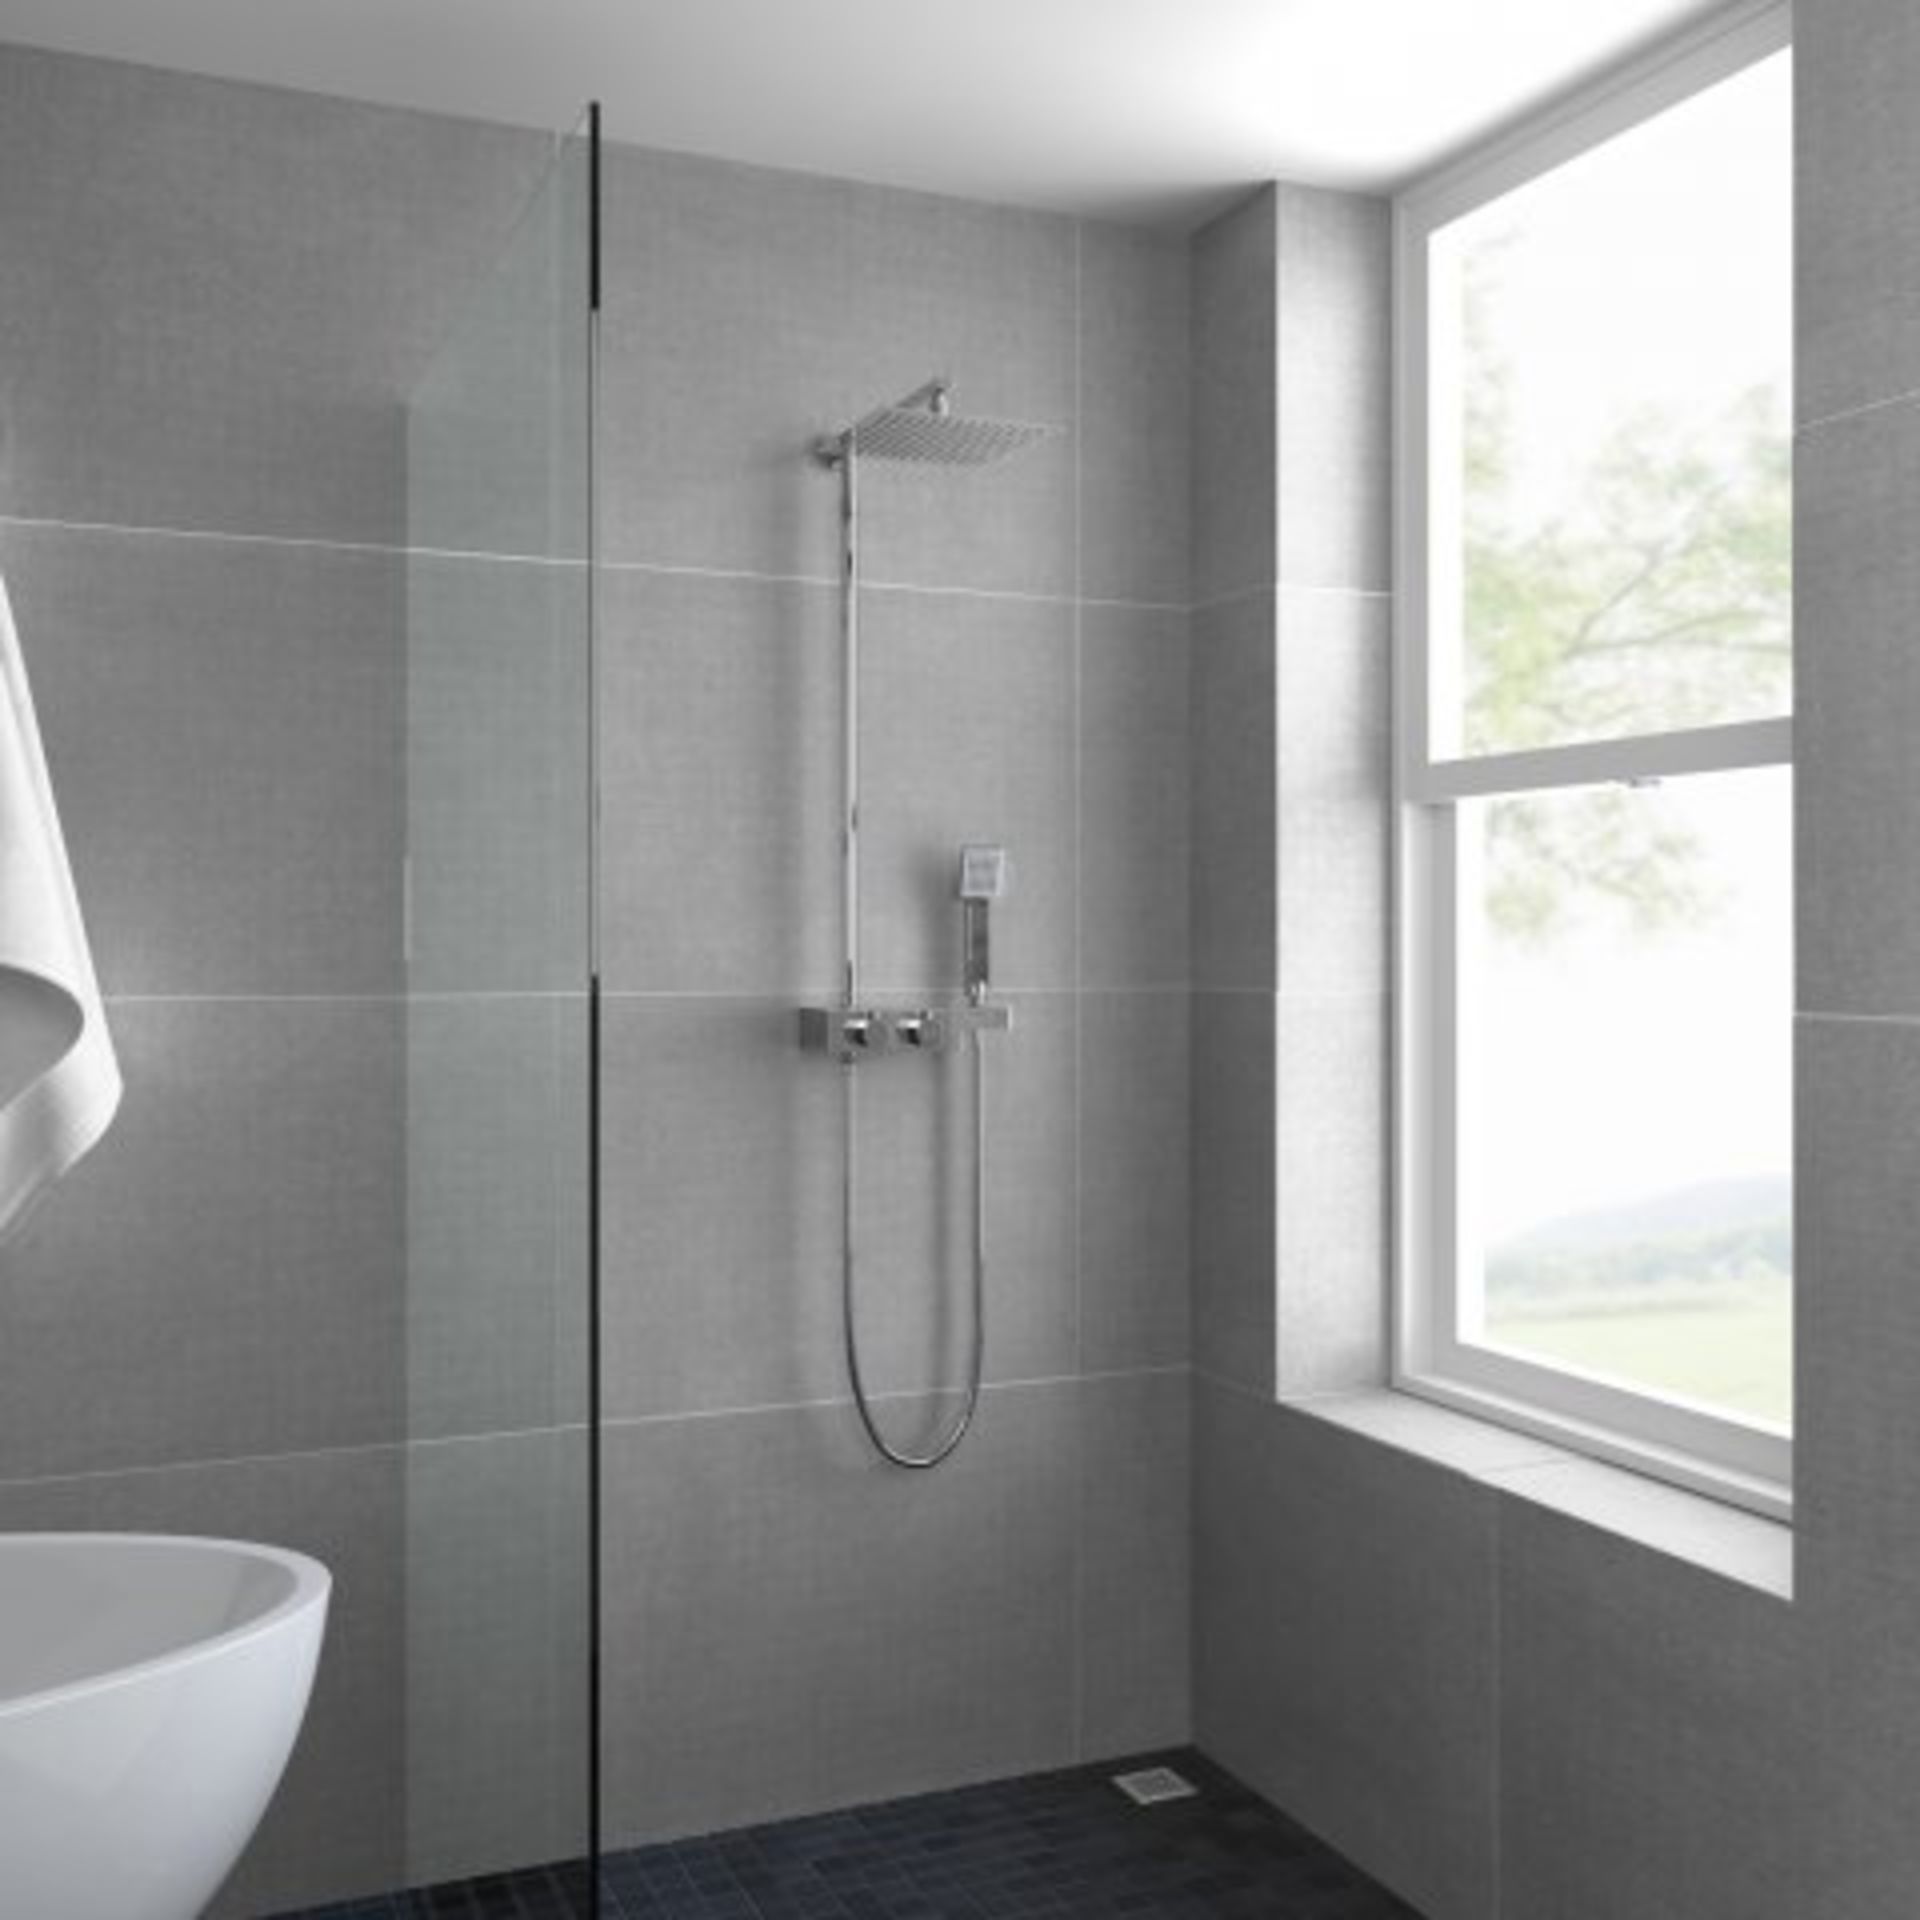 (T28) Thermostatic Exposed Shower Kit 250mm Square Head Handheld. RRP £349.99. Designer Style Our - Image 3 of 5